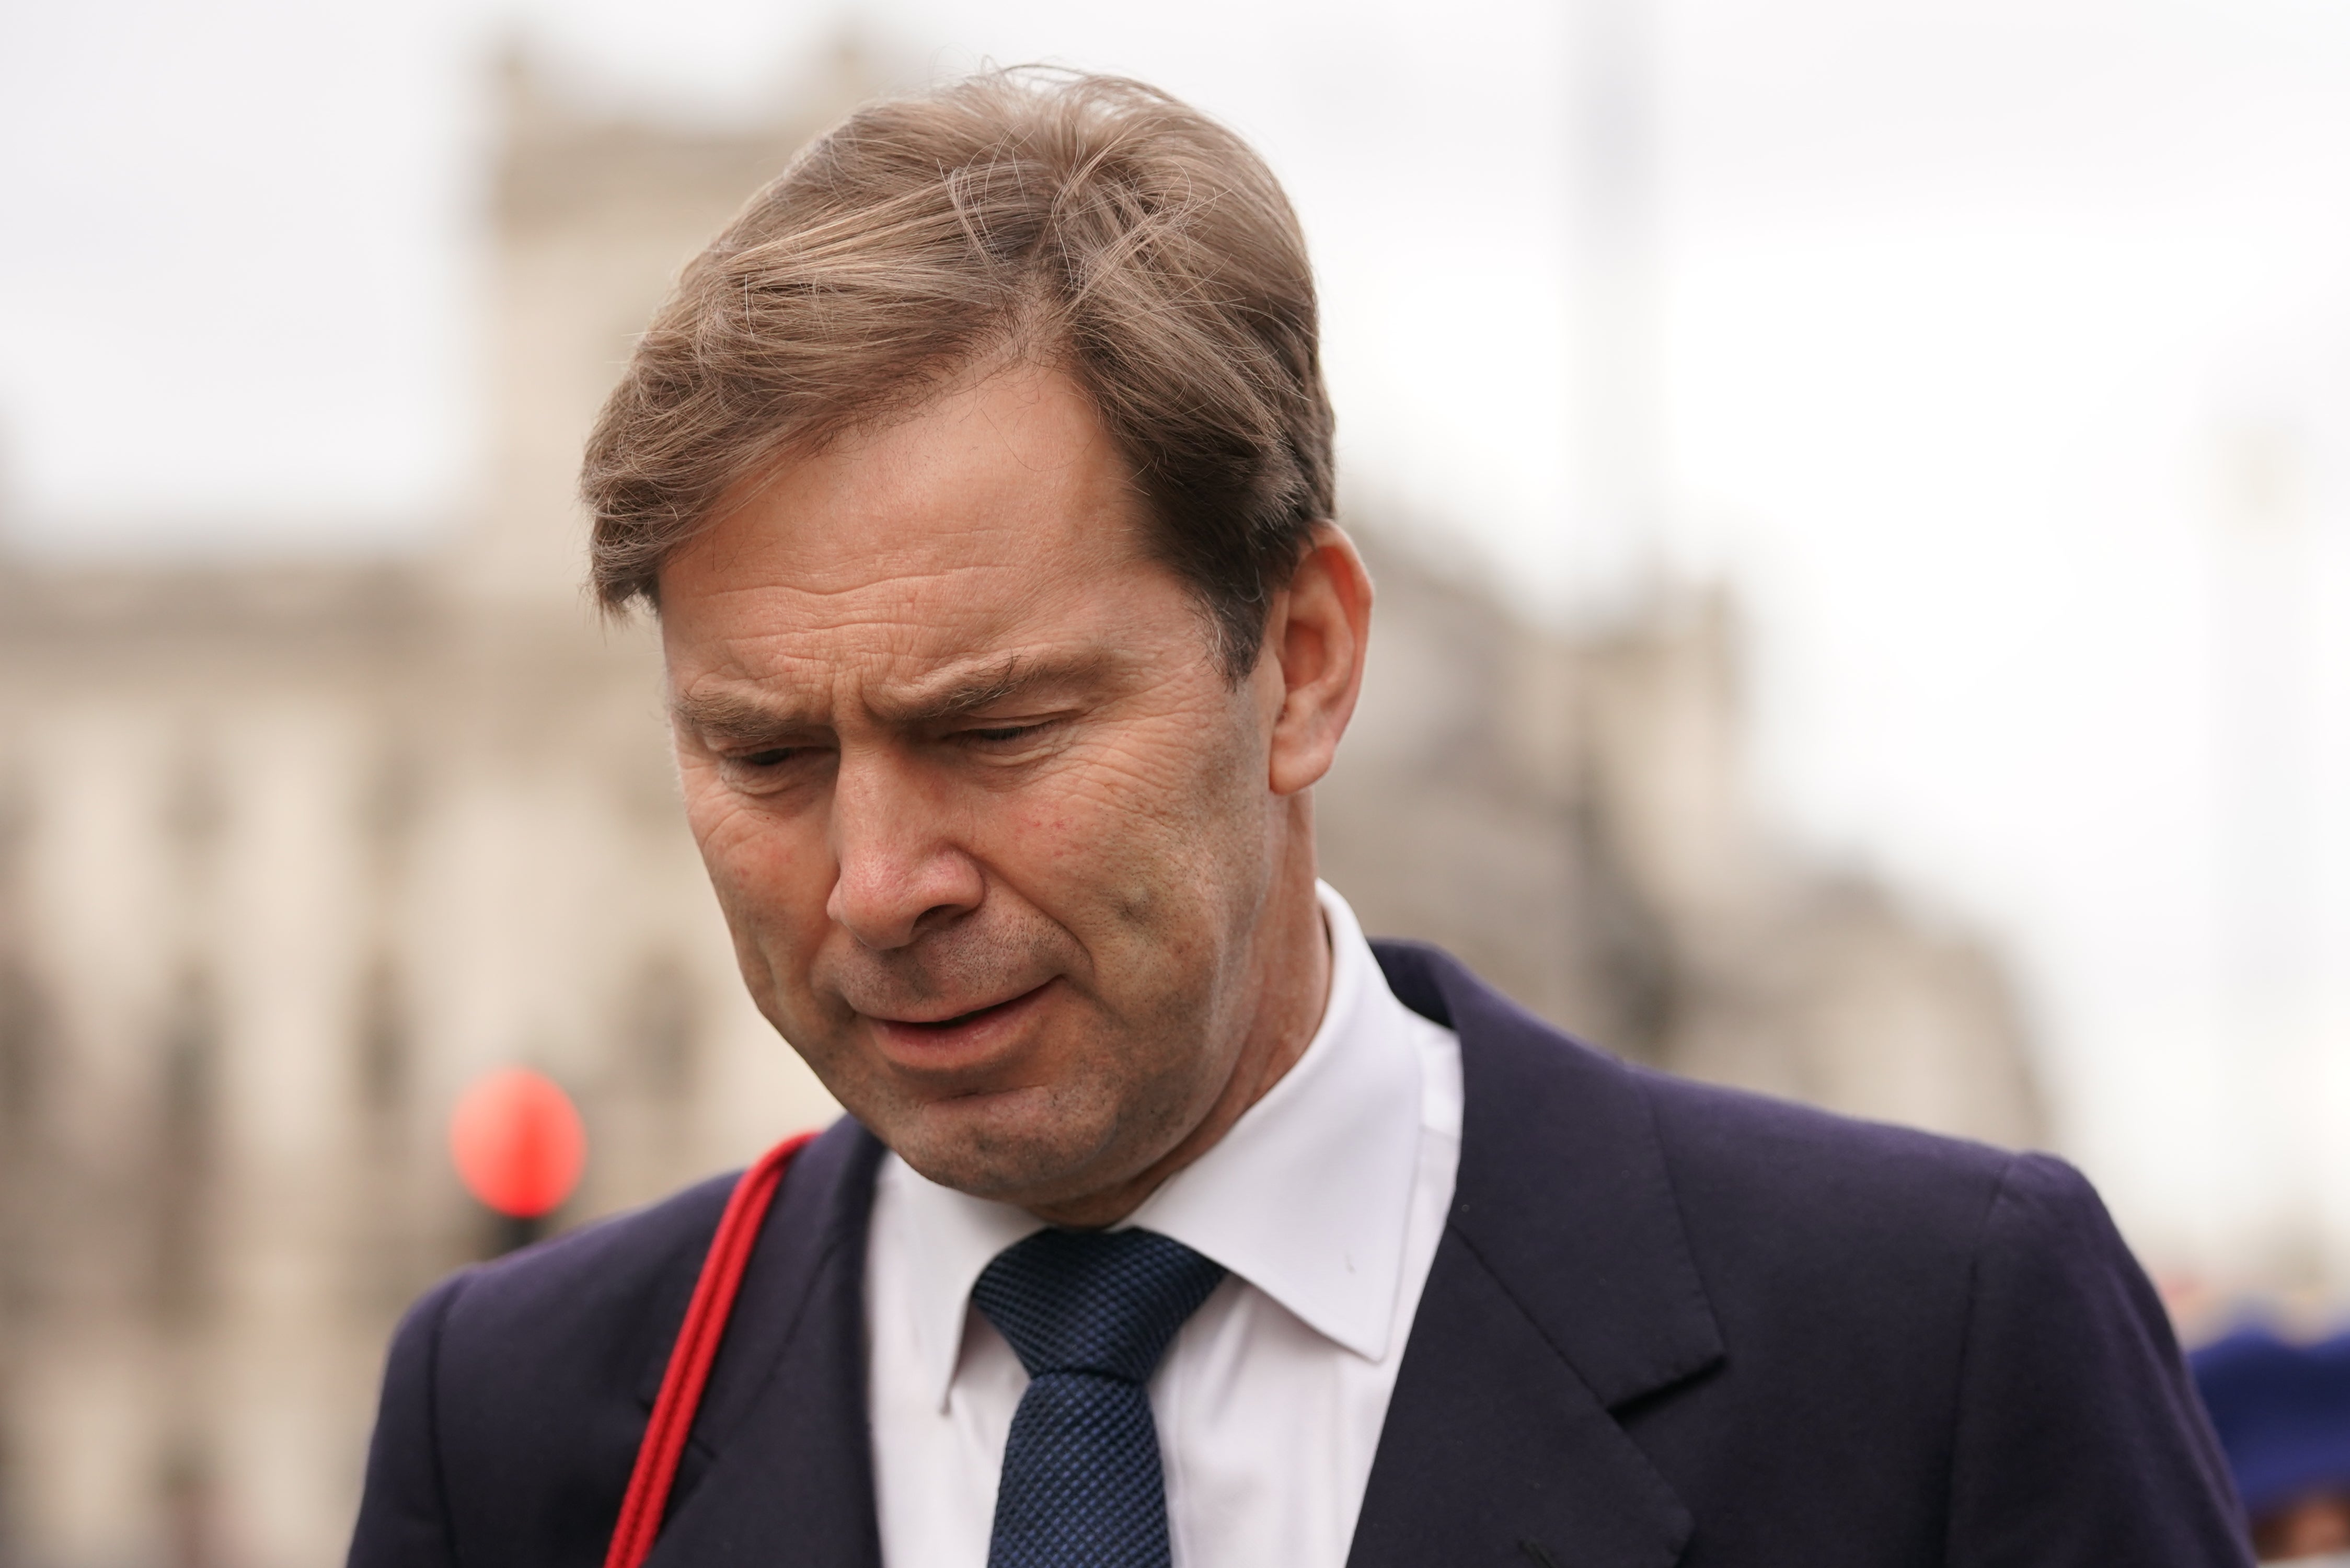 Former minister Tobias Ellwood has submitted a no confidence letter